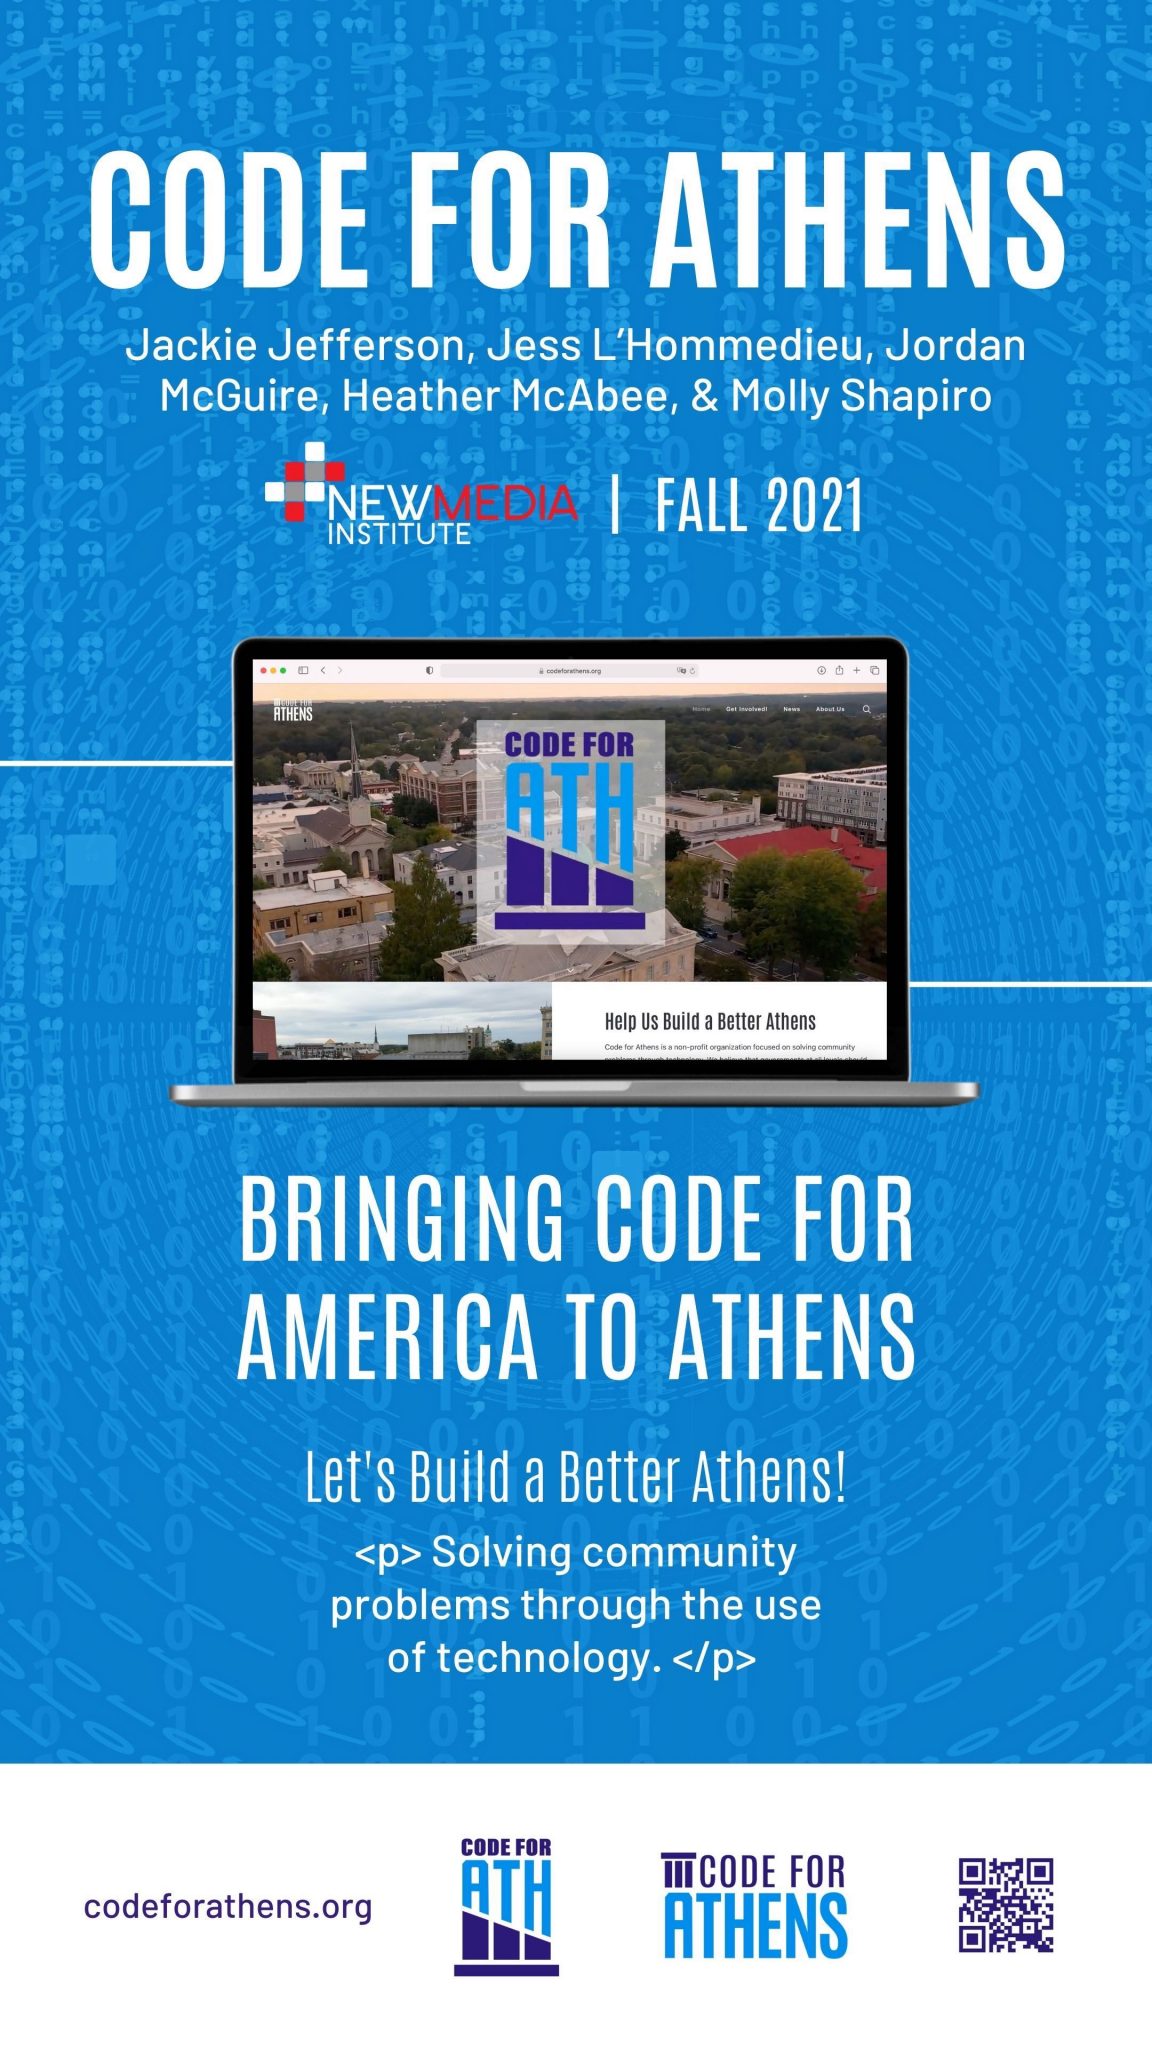 Code for Athens